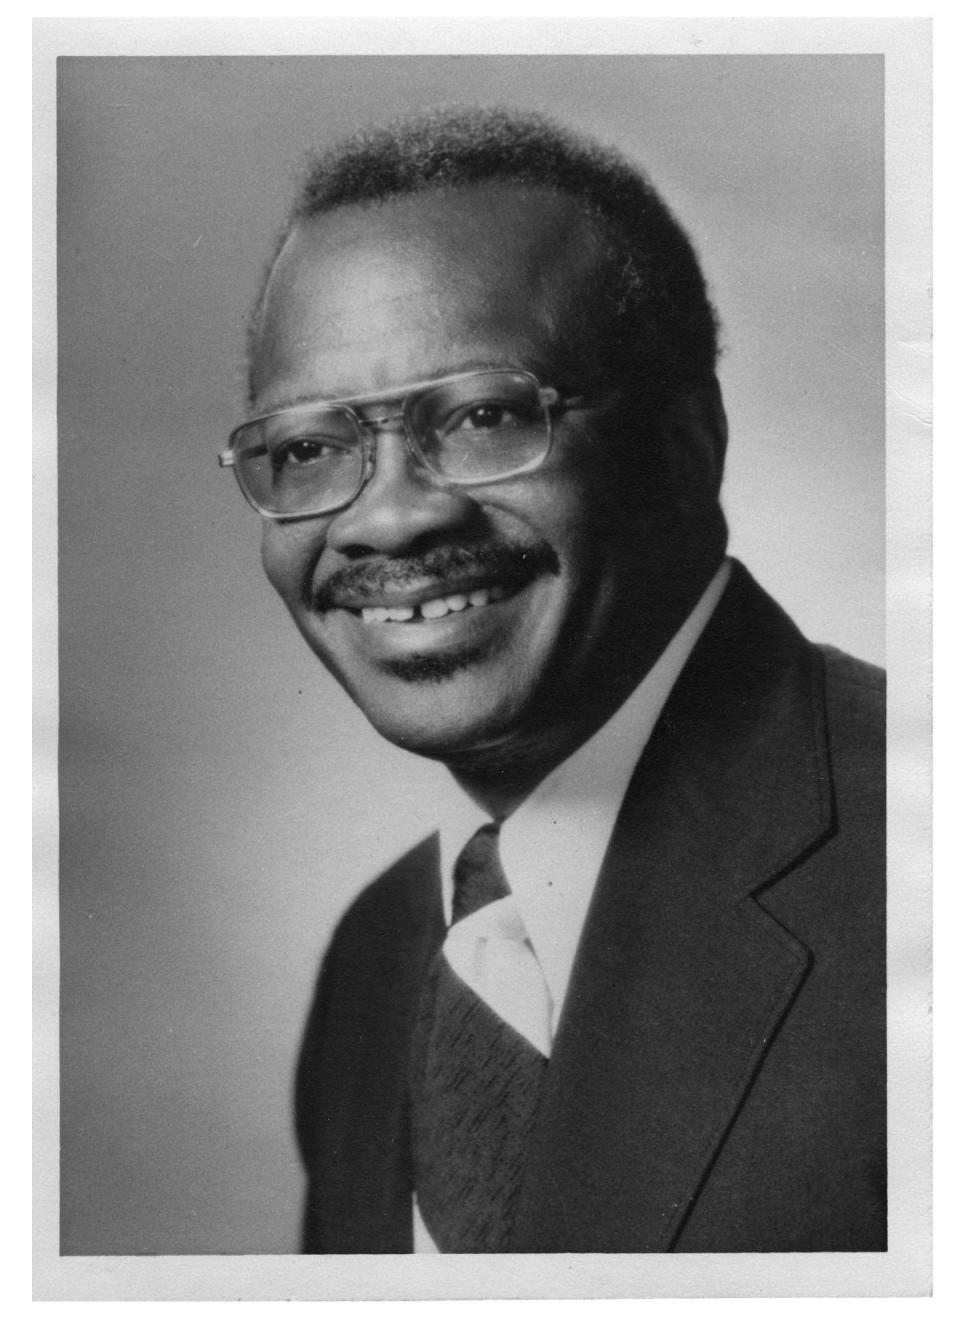 The Rev. Marvin C. Griffin spoke from the Ebenezer Baptist Church pulpit from 1968 to 2011.